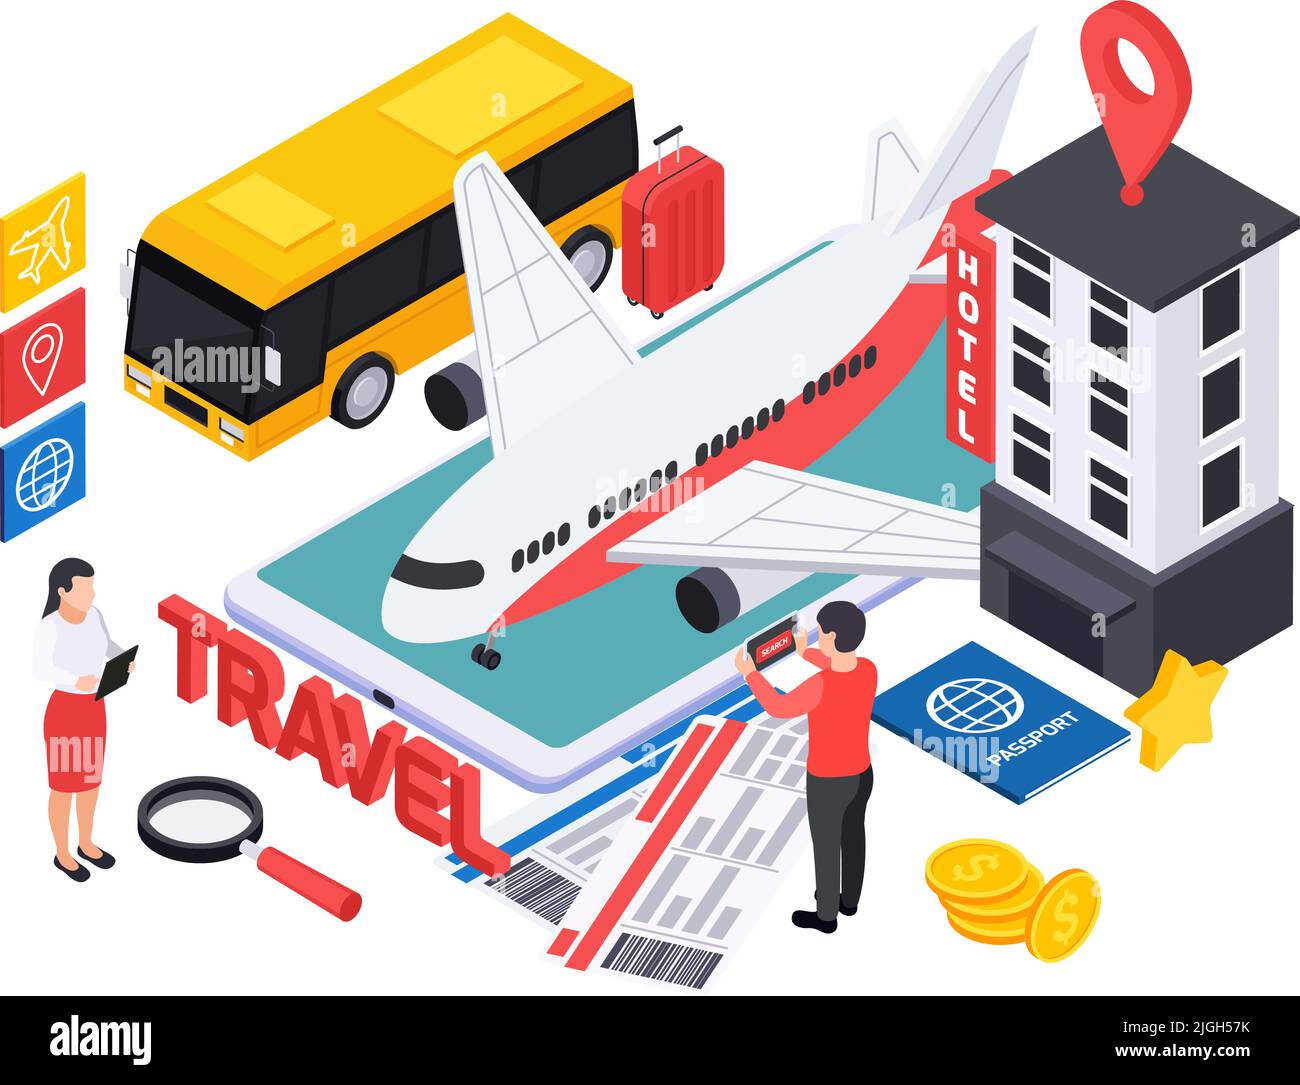 Online booking services in touristic business design concept with smartphone hotel bus airplane isometric icons vector illustration Stock Vector